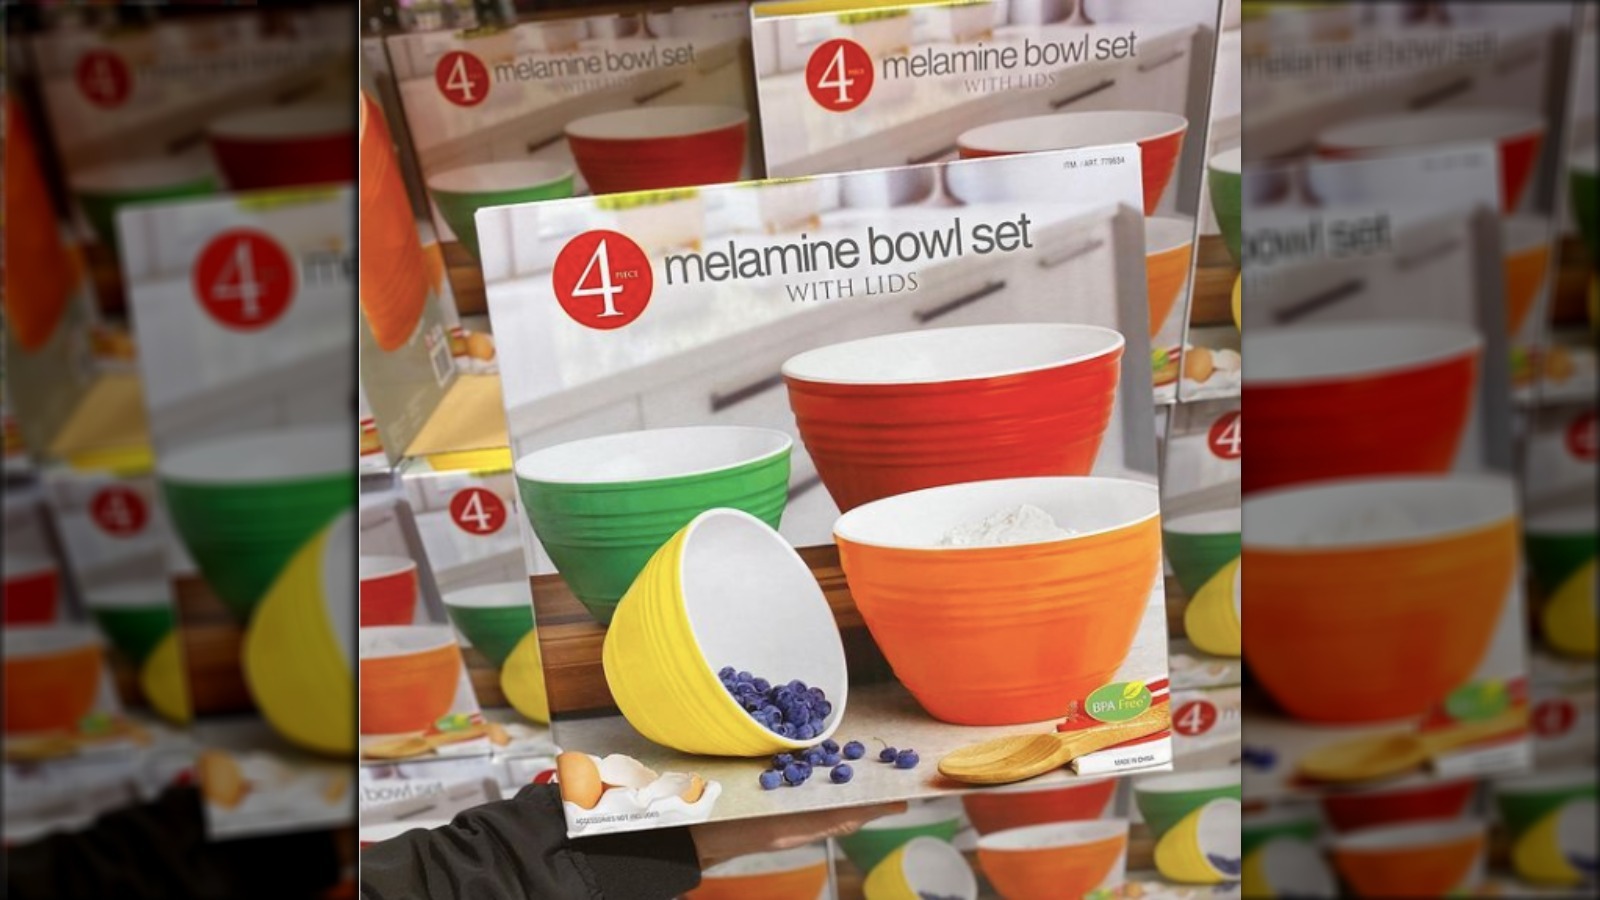 https://www.mashed.com/img/gallery/costcos-colorful-melamine-bowl-set-is-a-total-steal/l-intro-1616780231.jpg